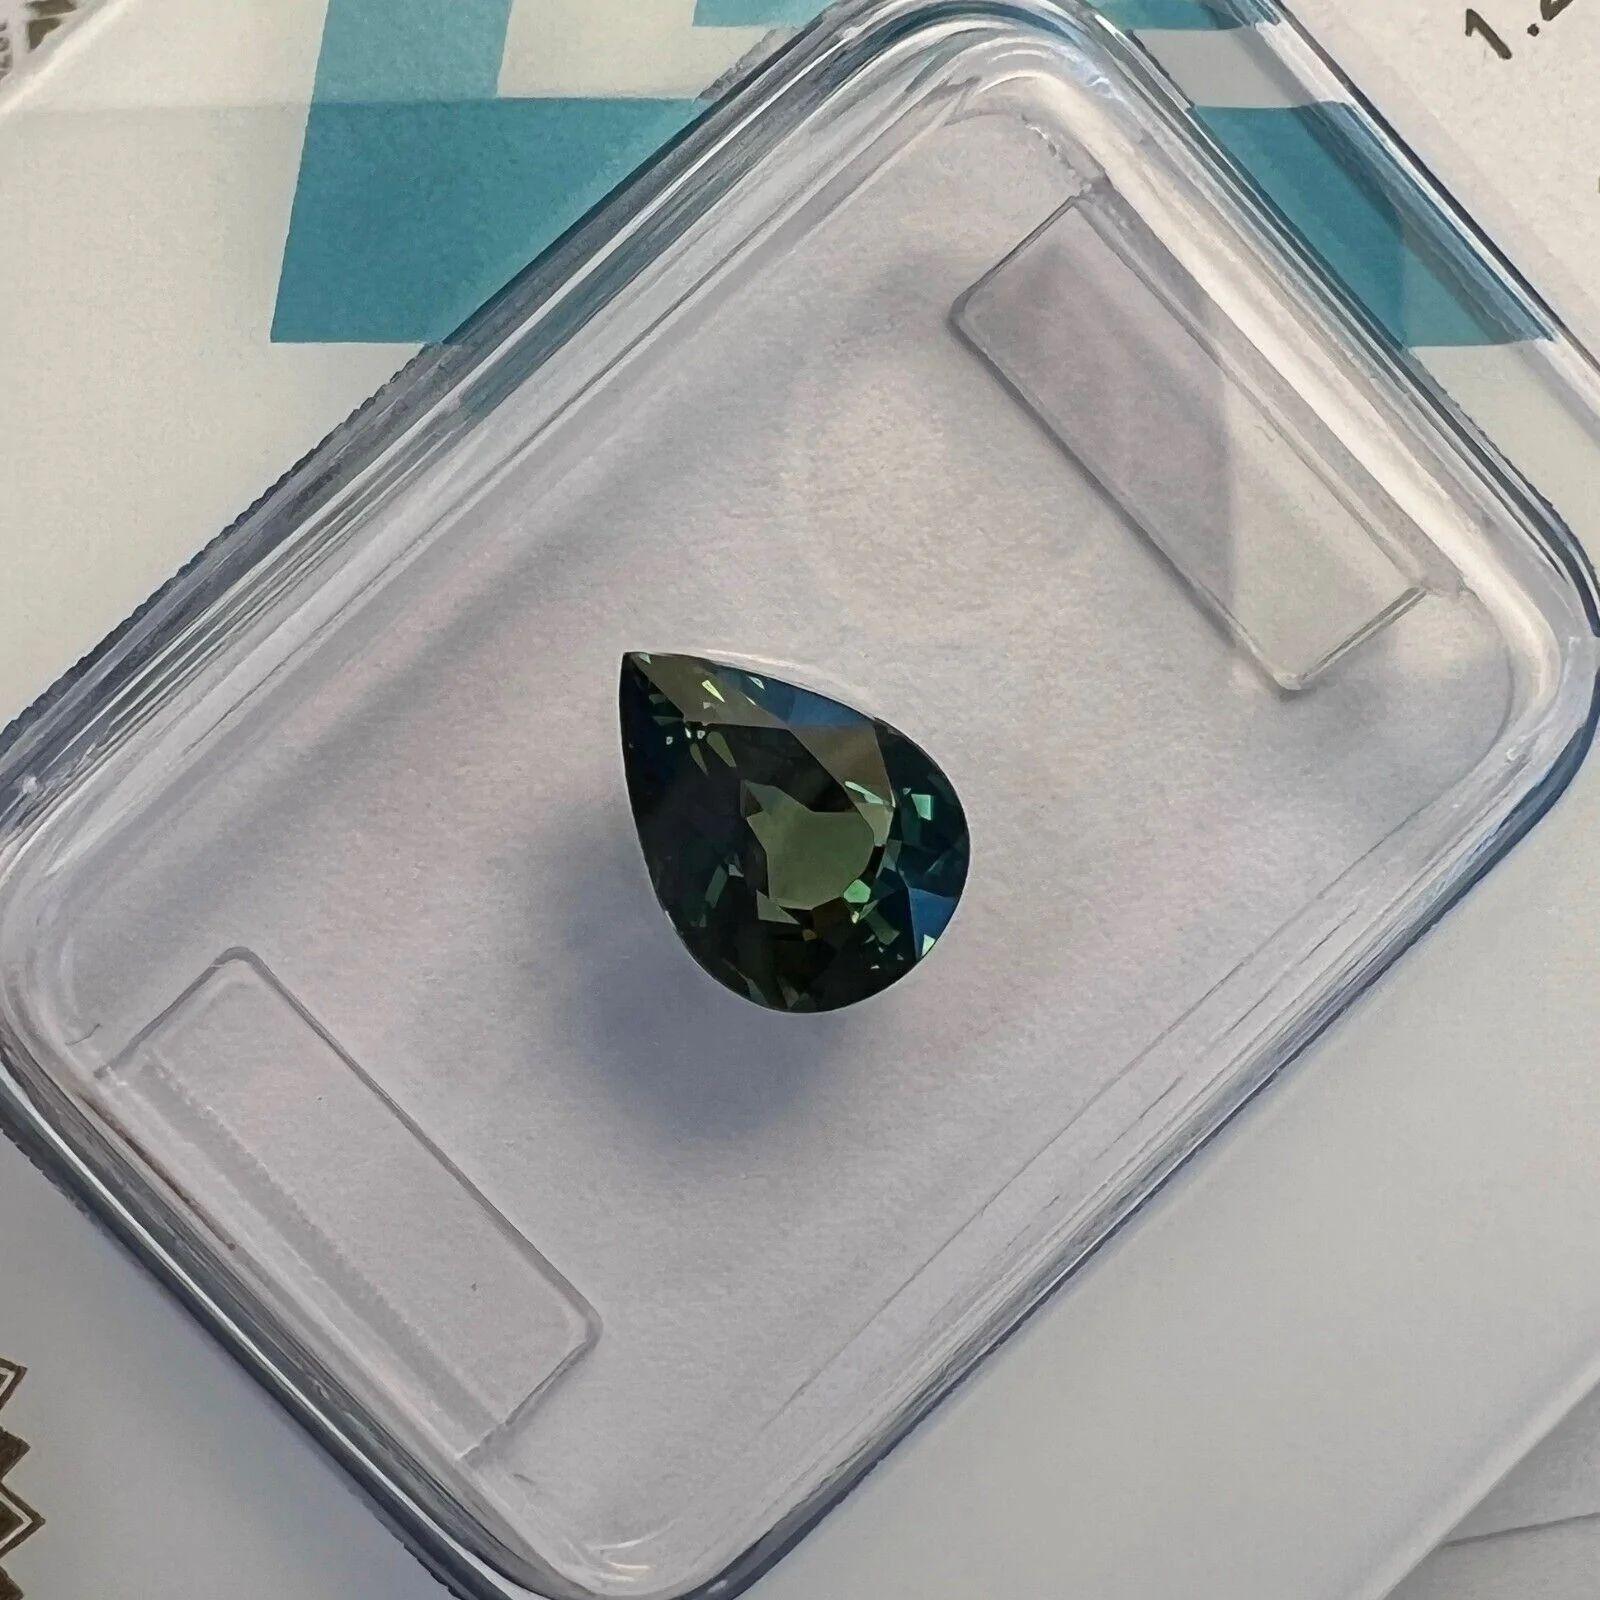 1.21ct Colour Change Sapphire Green Blue Untreated IGI Certified Unheated Pear

Rare Untreated Colour Change Sapphire Gemstone.
1.21 Carat unheated sapphire with a rare colour change effect. Changing colour depending on the light its viewed in. Very